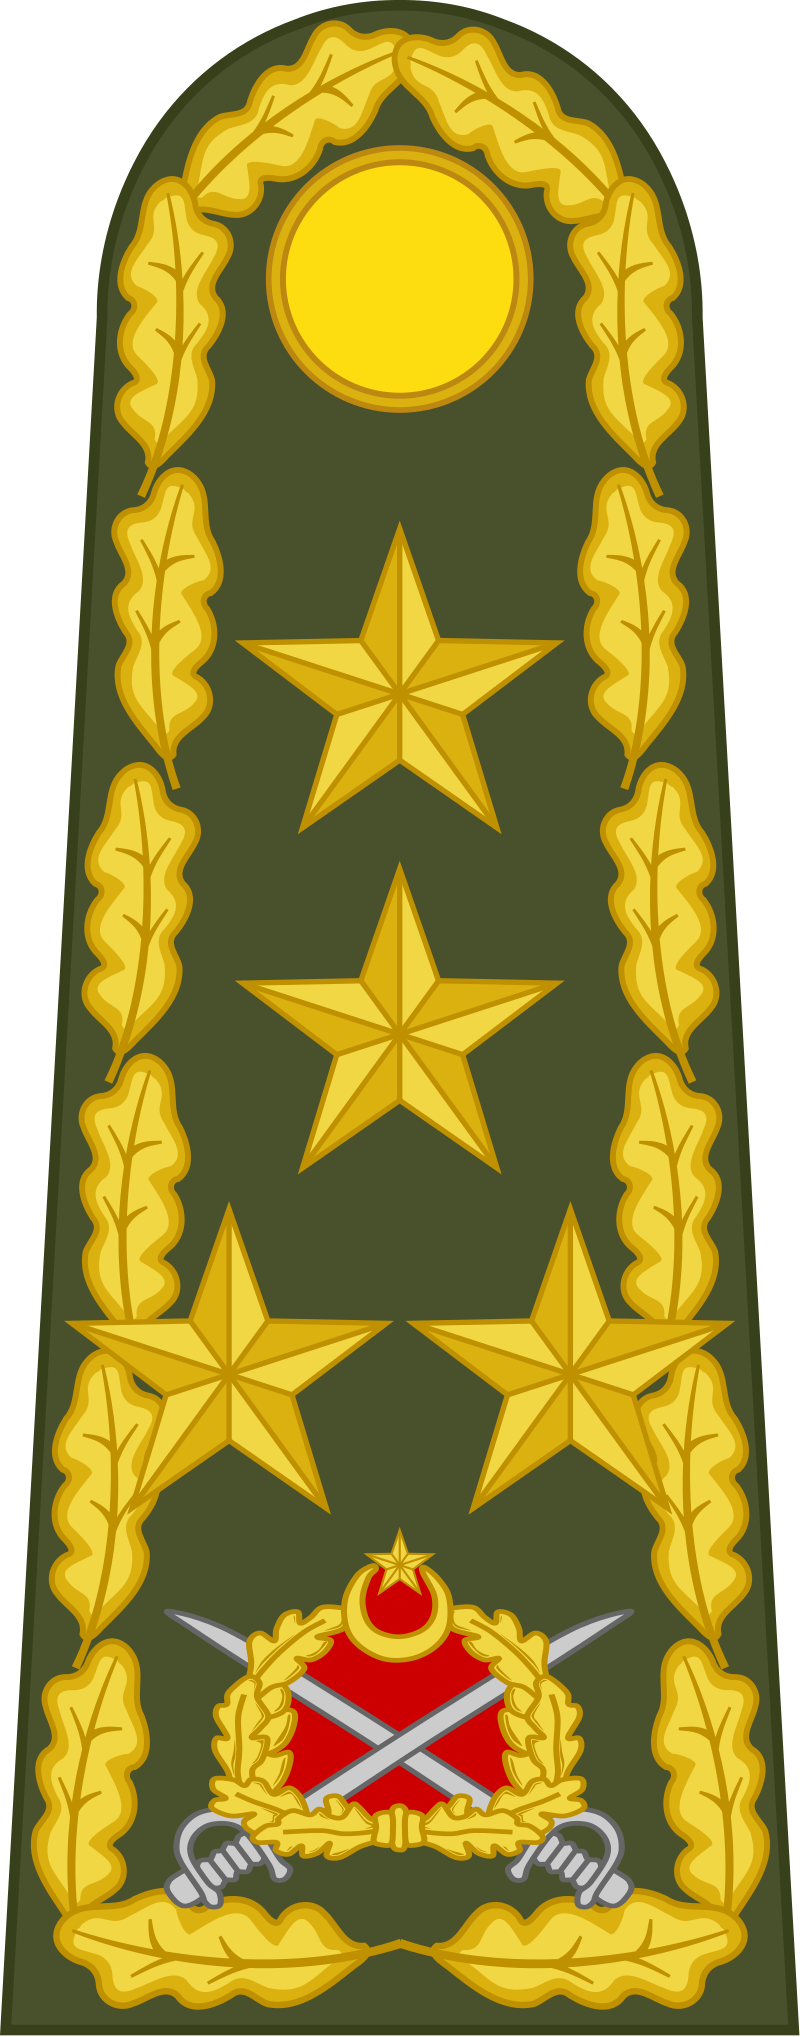 orgeneral